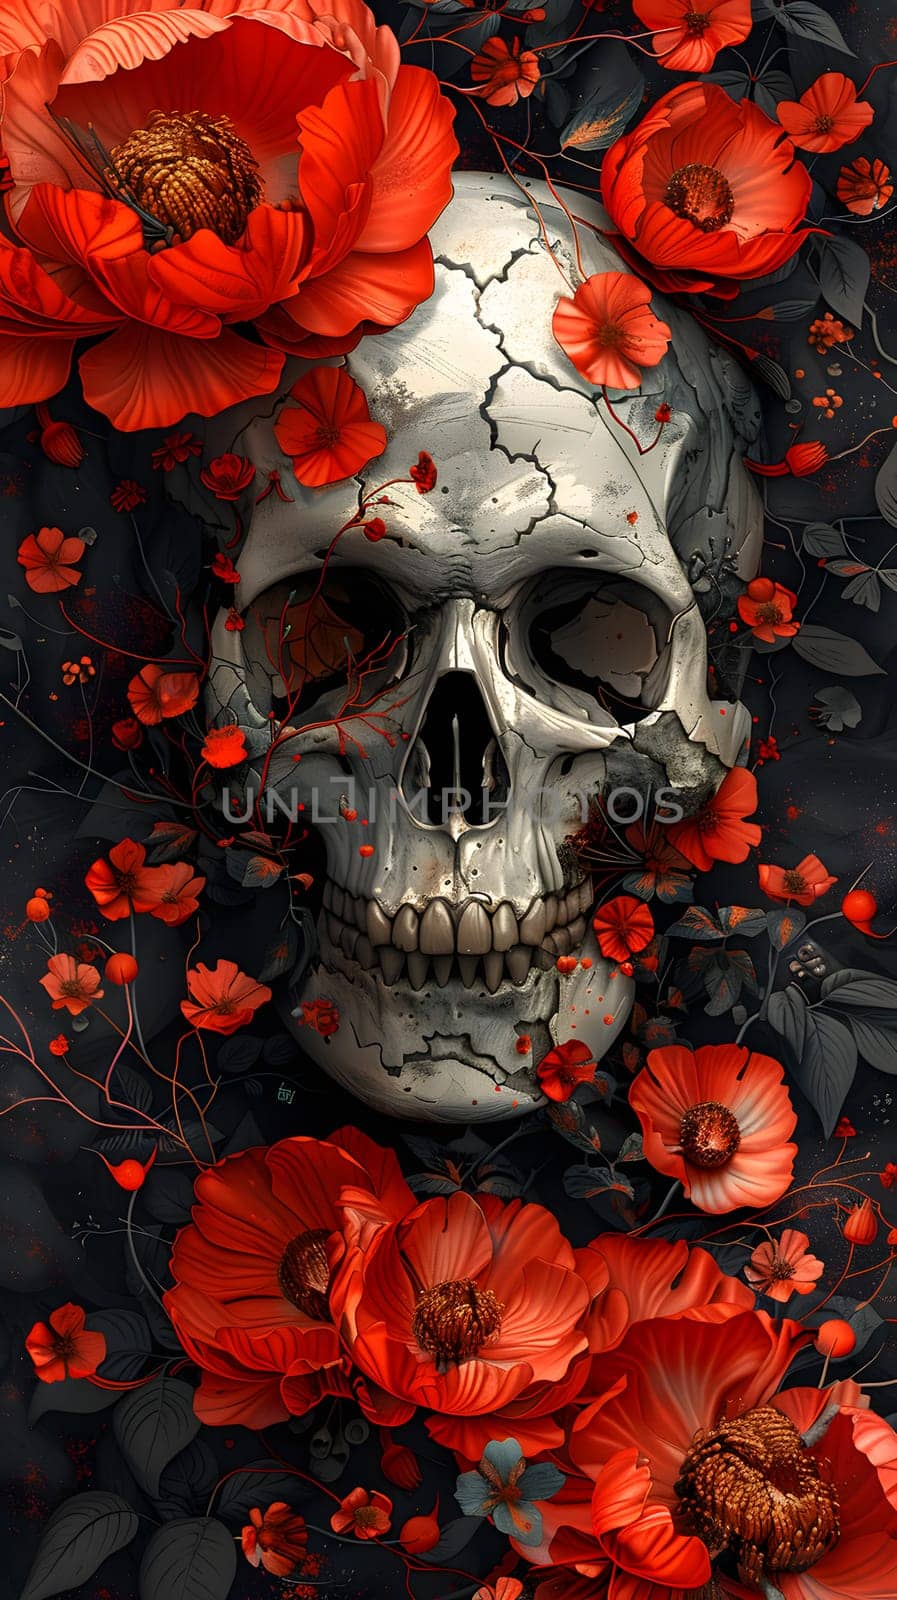 Skull with jawbone framed by red flower petals in painting by Nadtochiy